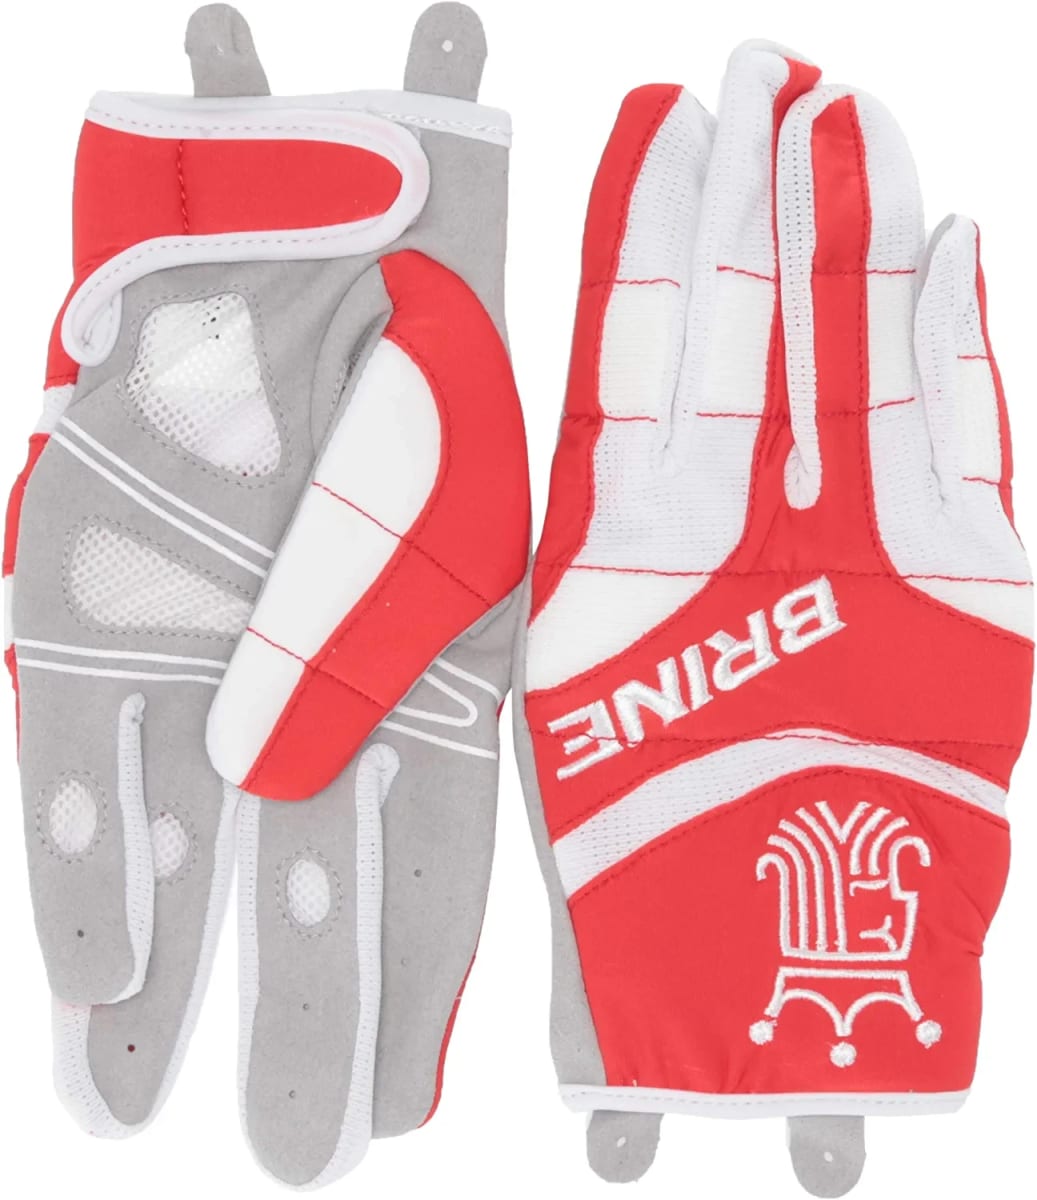 Lacrosse Integra Glove with Phase Change Technology for Attack